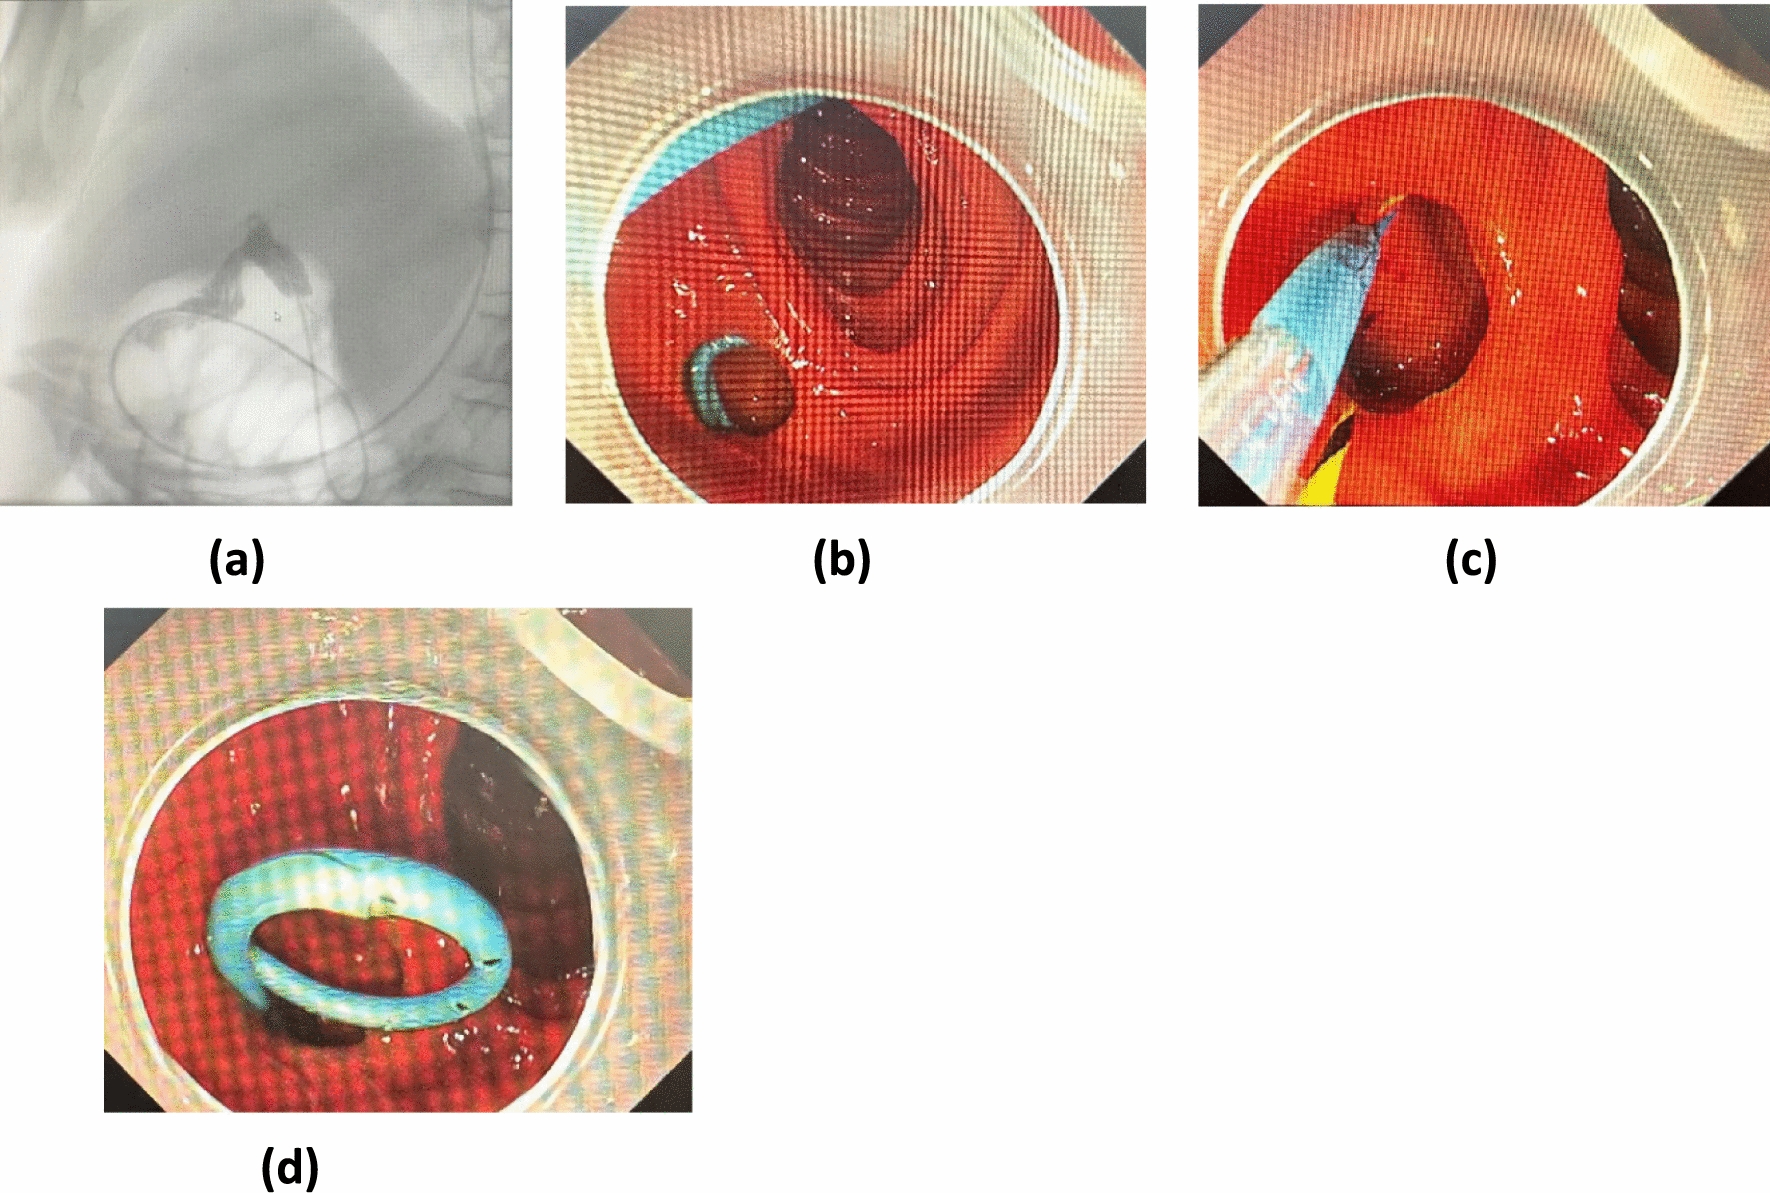 Endoscopic Placement of a Stent for Proximal Biliary Obstruction Due to a Choledochoduodenal Fistula